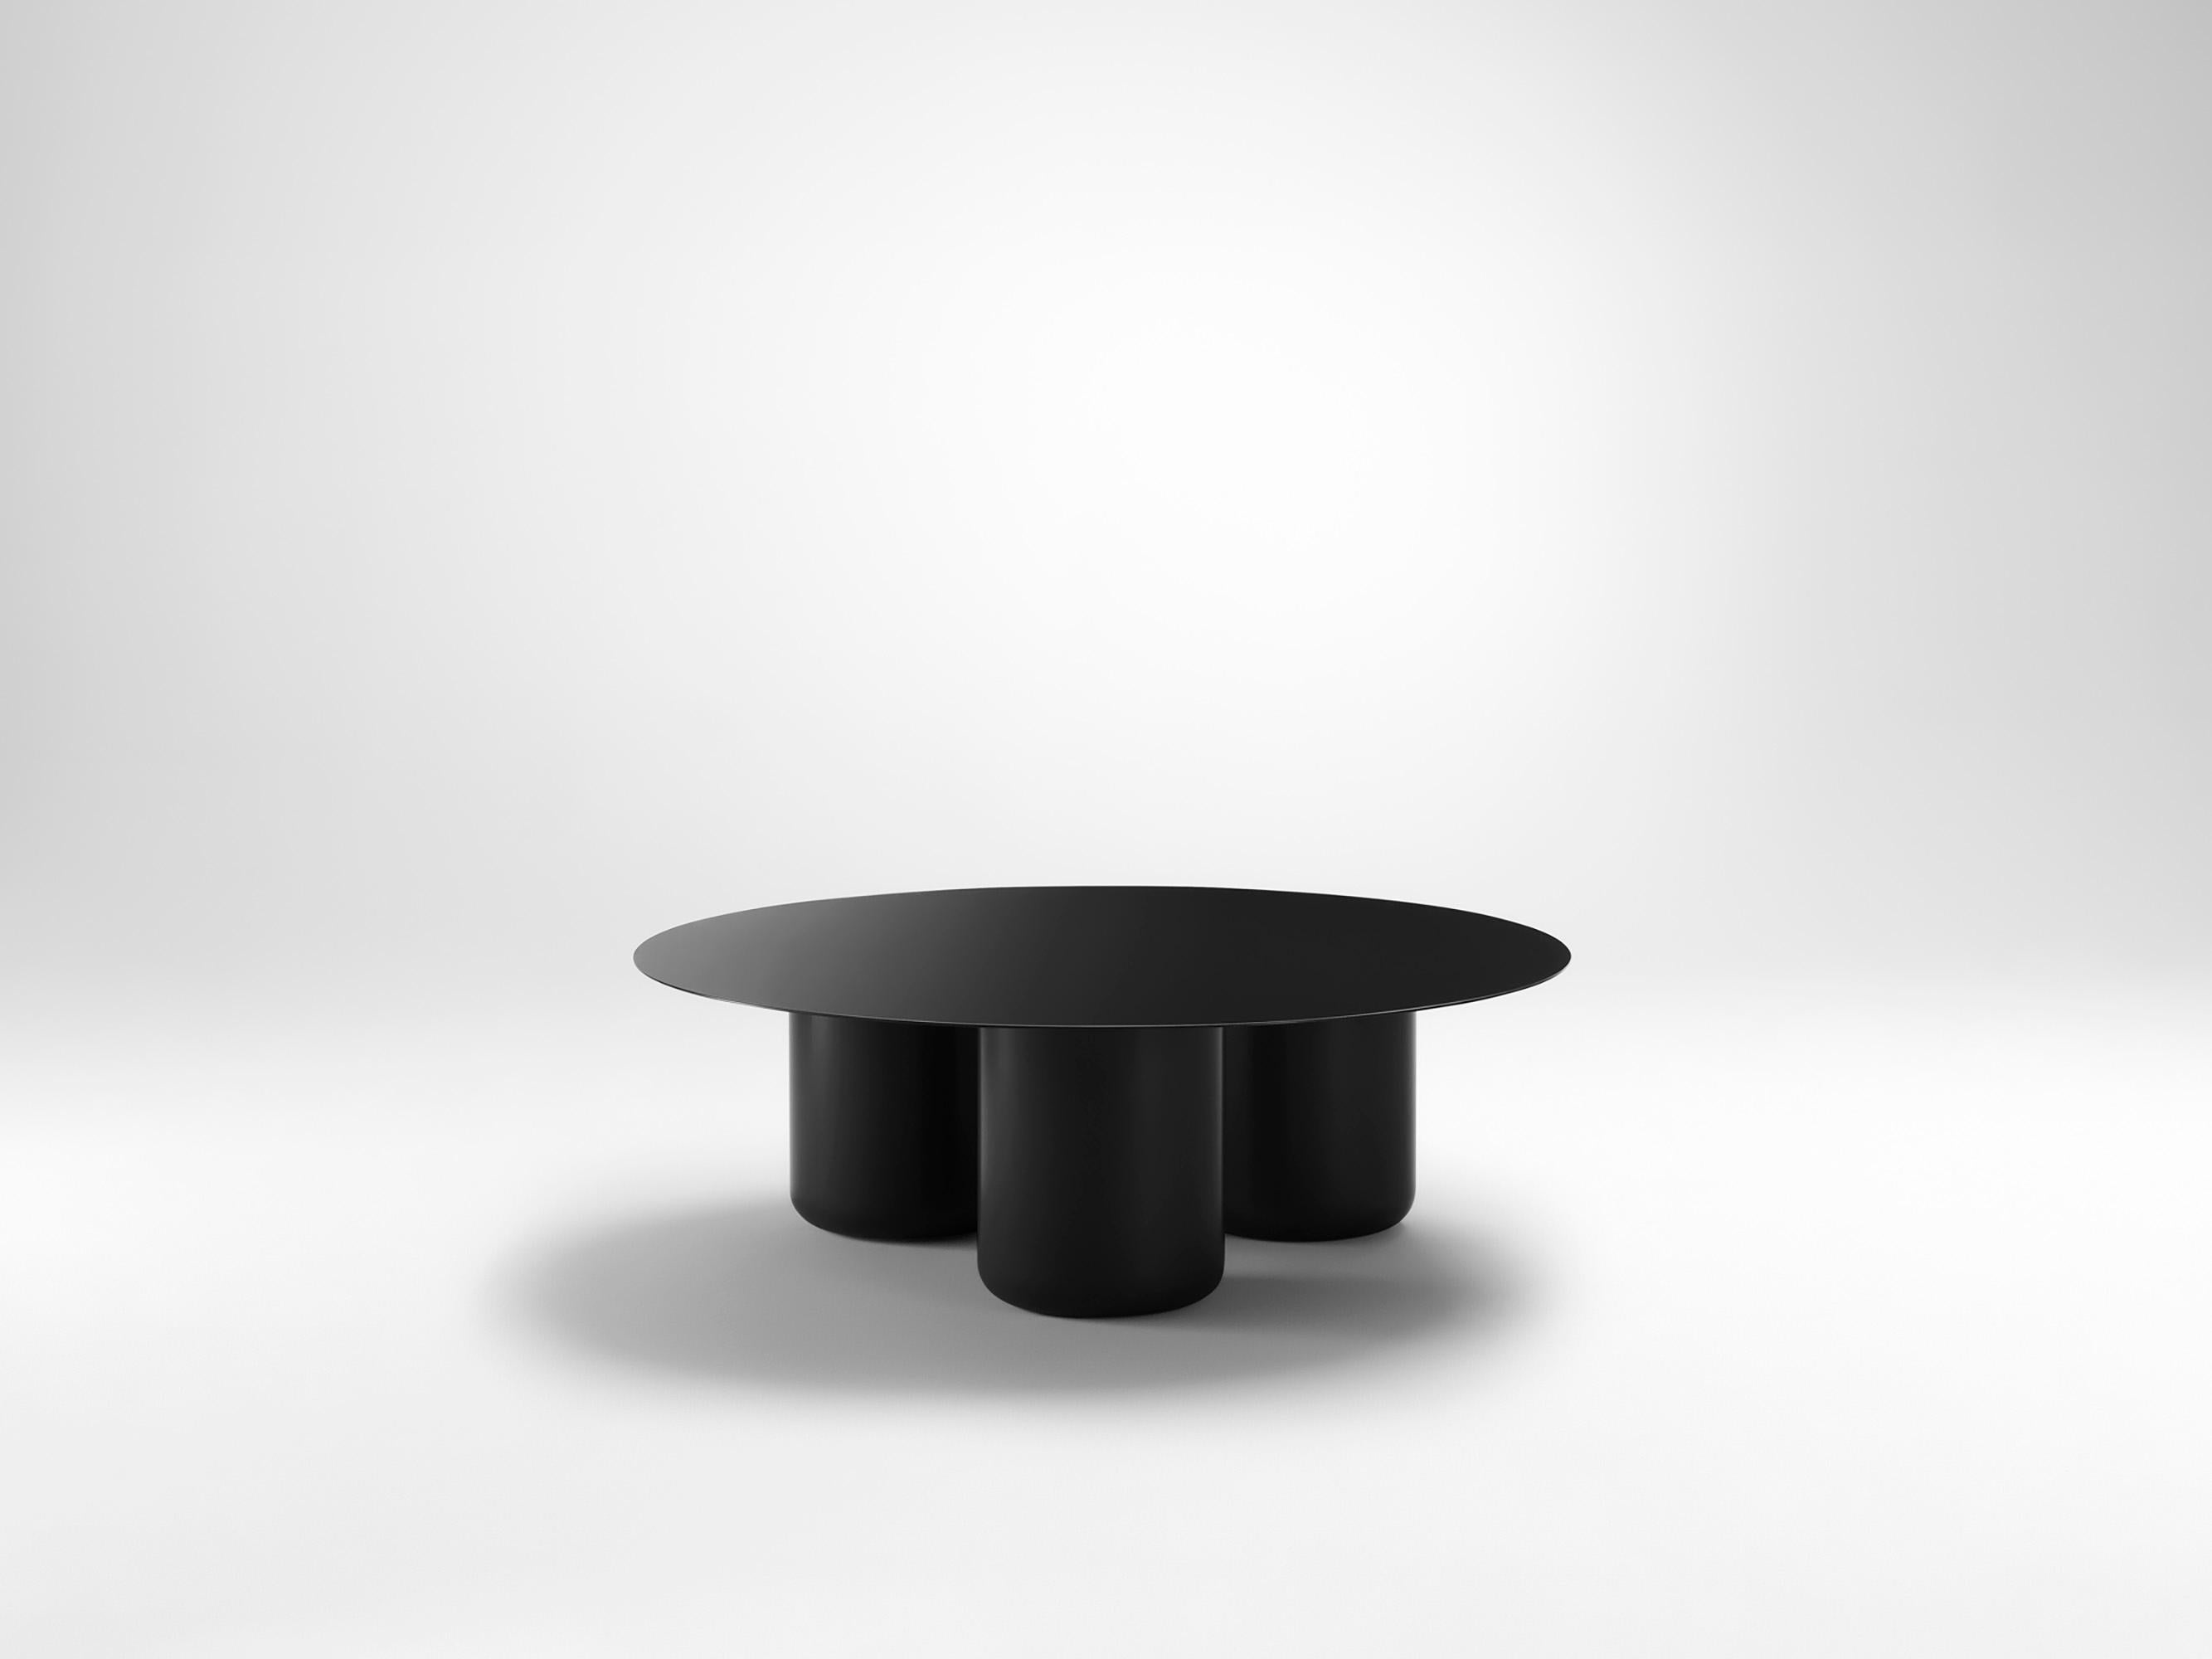 Black Round Table by Coco Flip
Dimensions: D 100 x H 32 / 36 / 40 / 42 cm
Materials: Mild steel, powder-coated with zinc undercoat. 
Weight: 34 kg

Coco Flip is a Melbourne based furniture and lighting design studio, run by us, Kate Stokes and